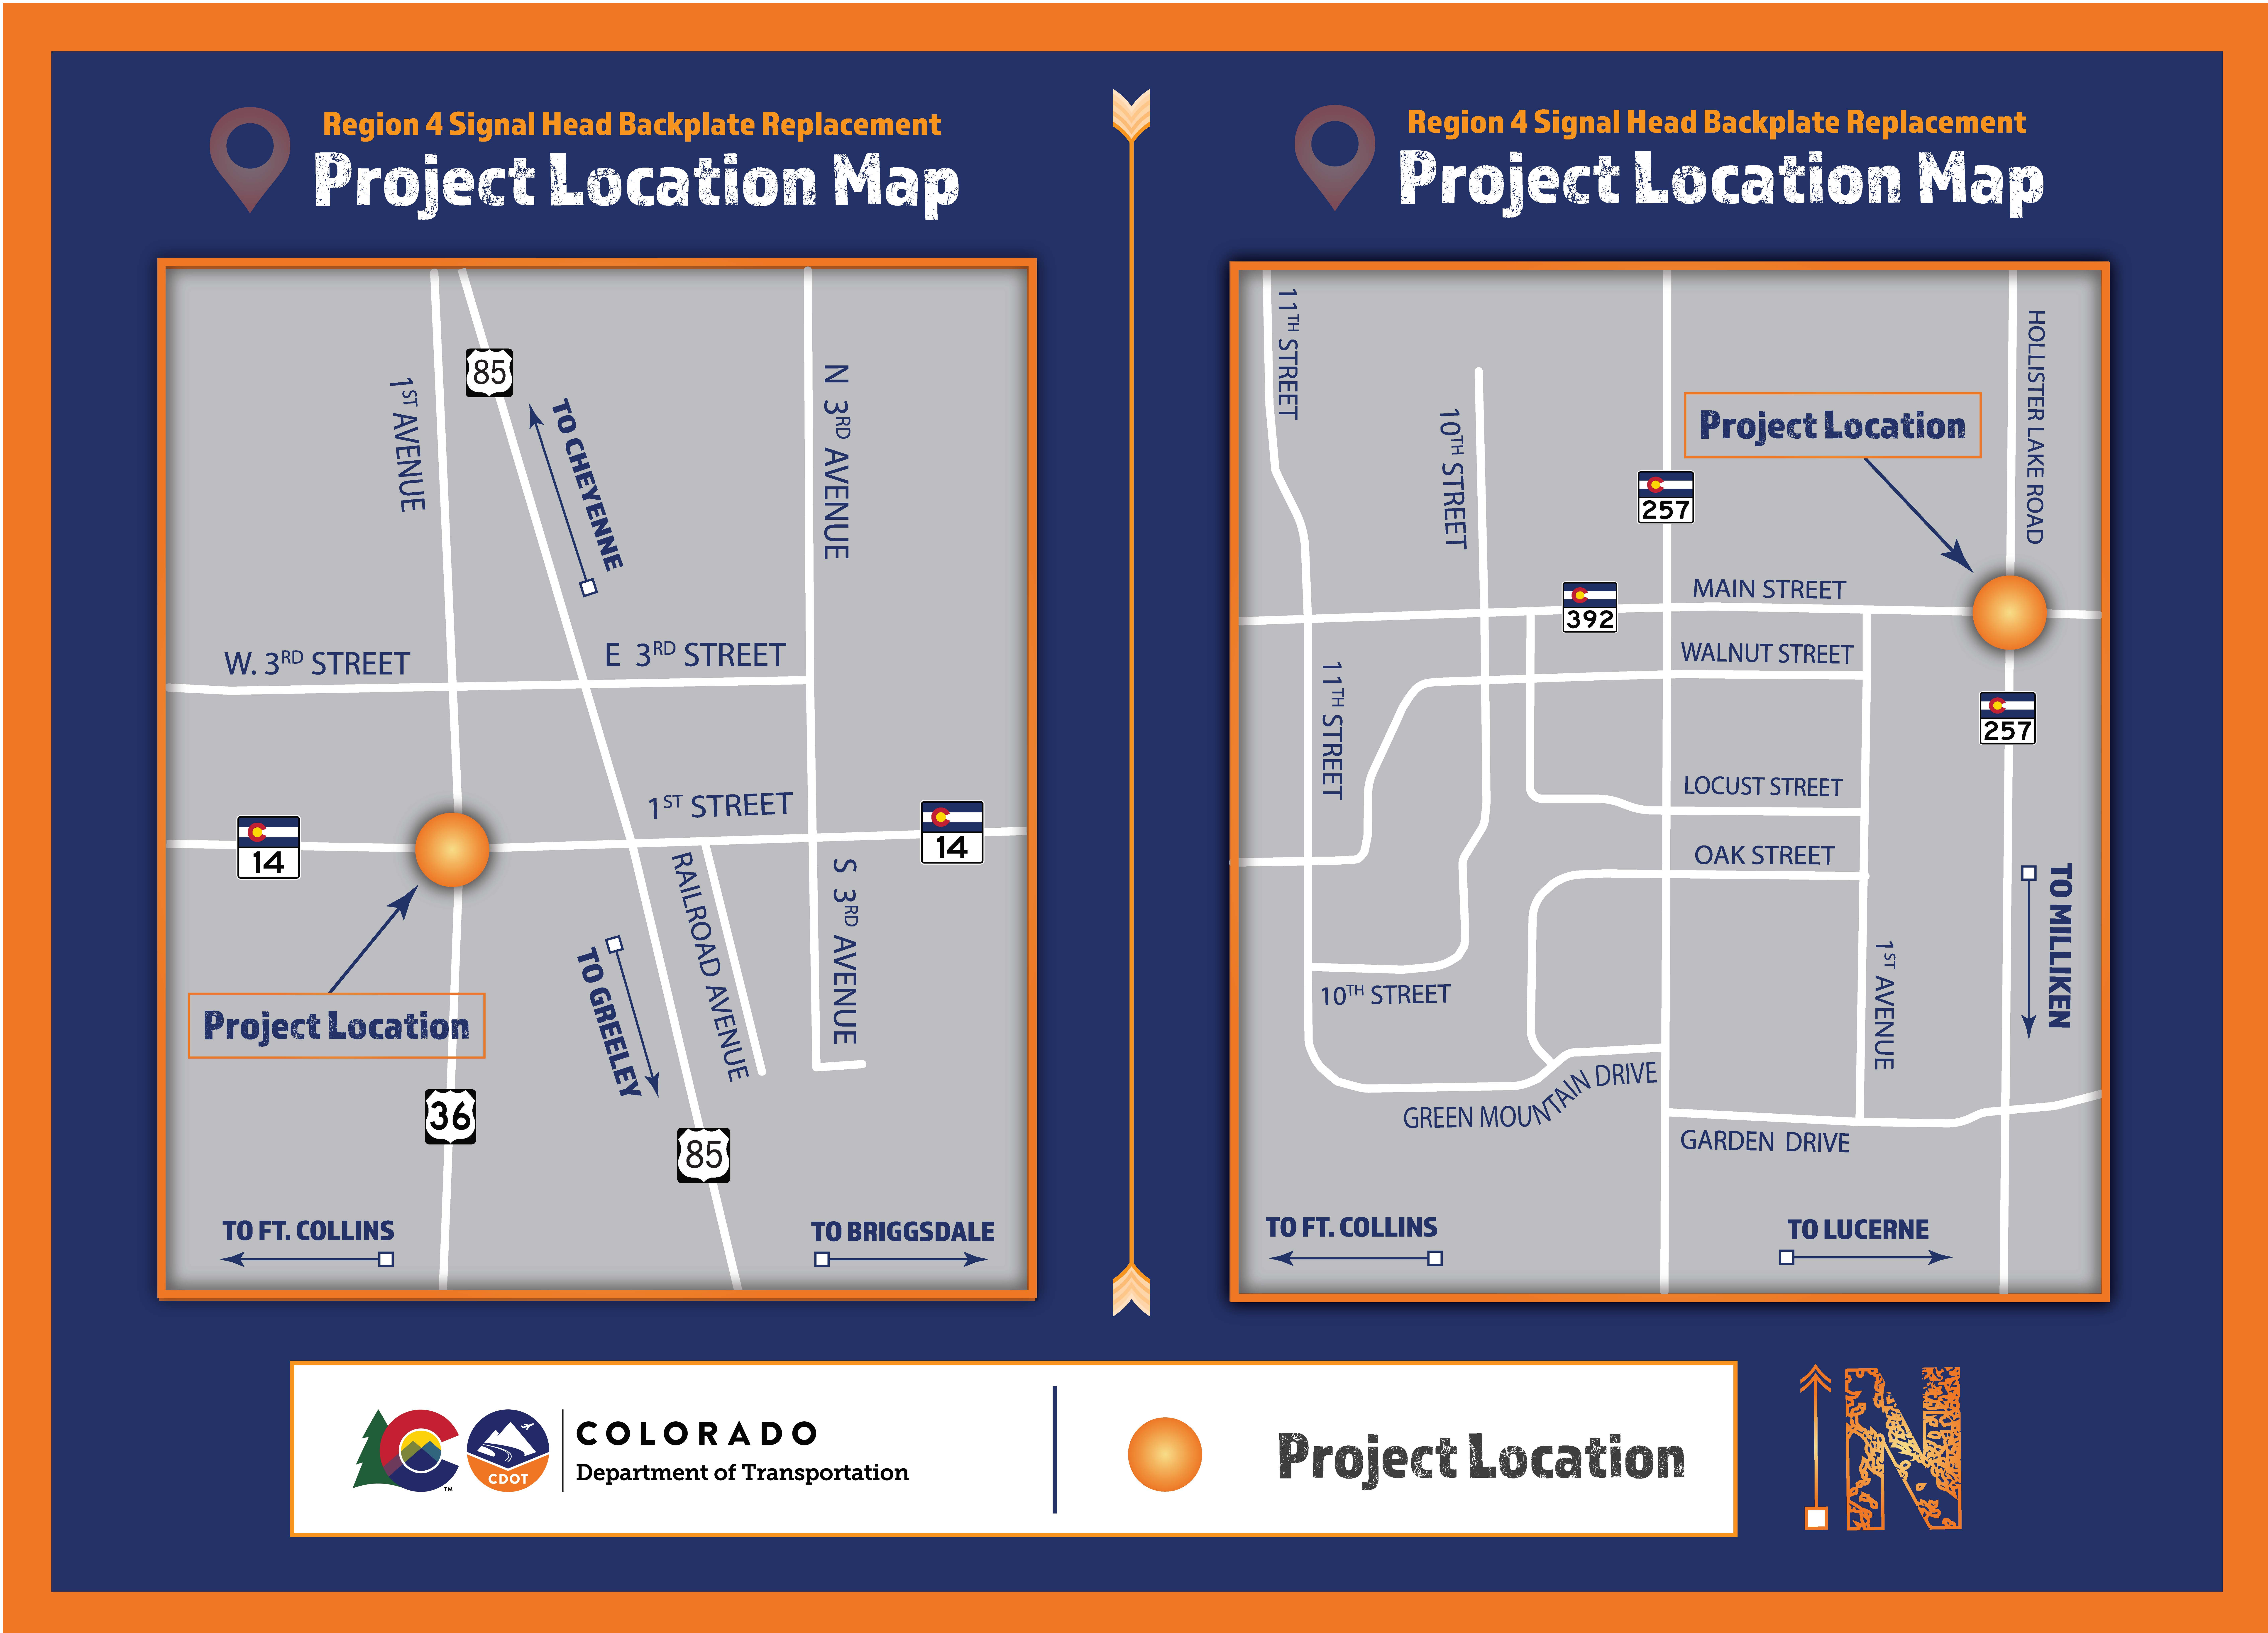 Project Map V2 Map Insets.jpg detail image